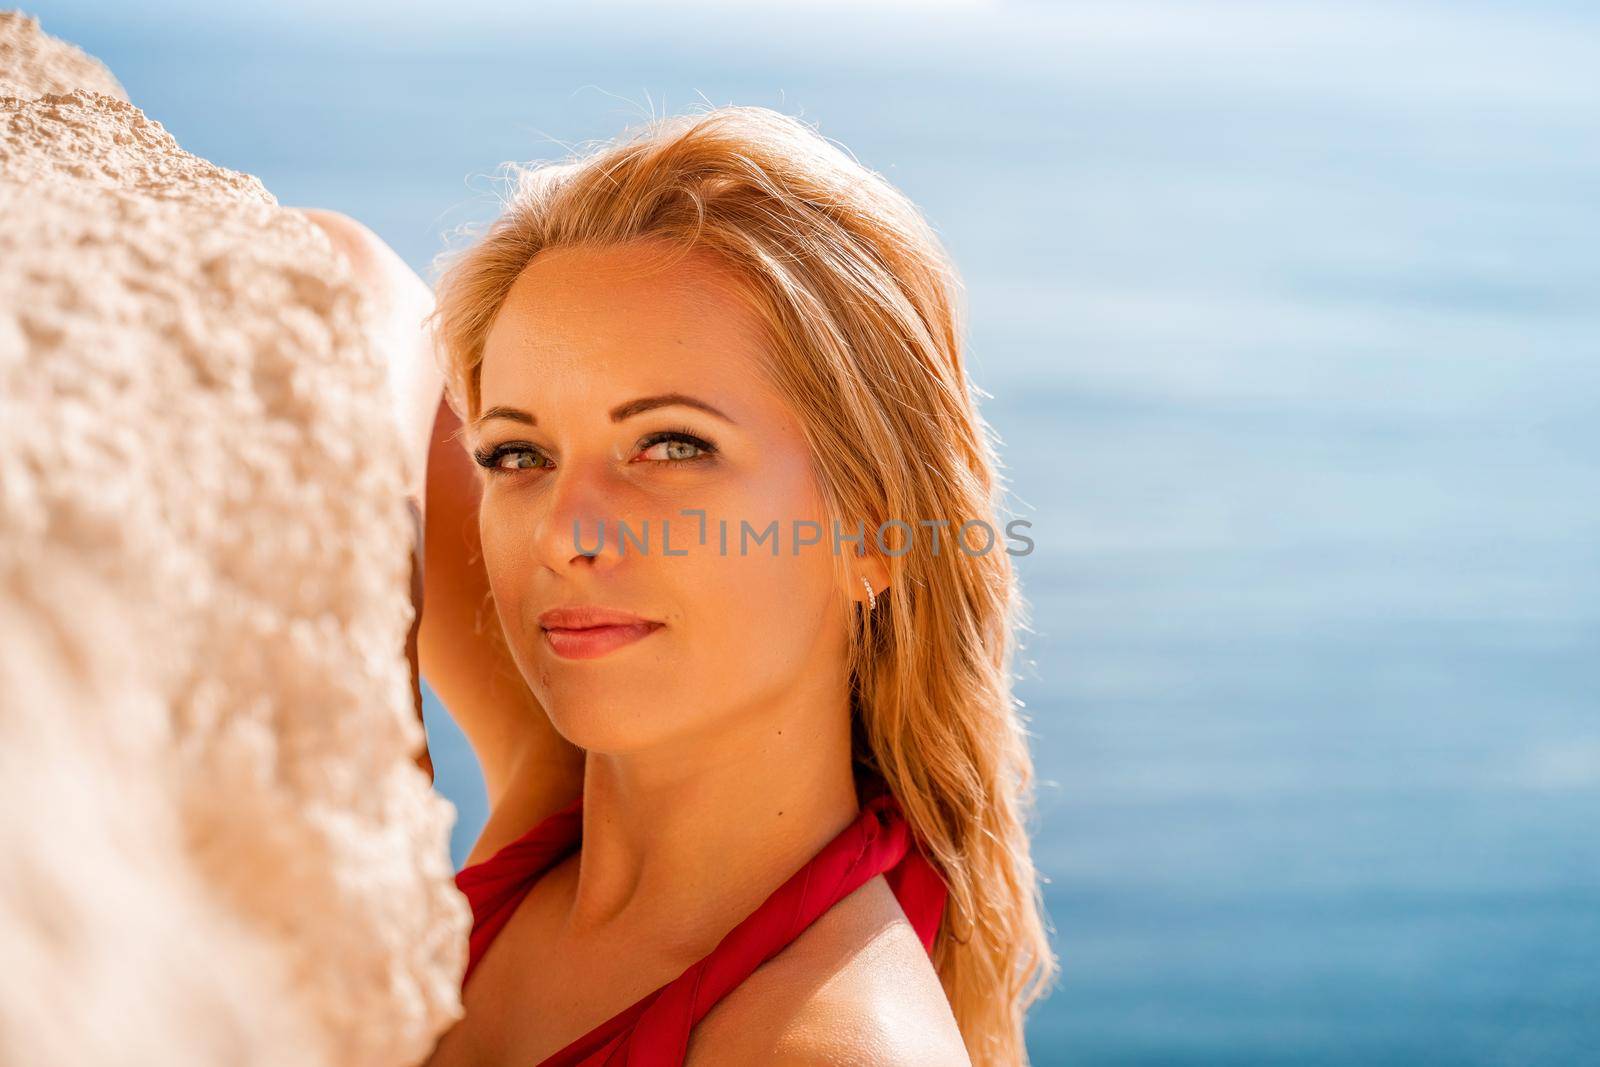 Smiling young woman in a red dress looks at the camera. A beautiful tanned girl enjoys her summer holidays at the sea. Portrait of a stylish carefree woman laughing at the ocean